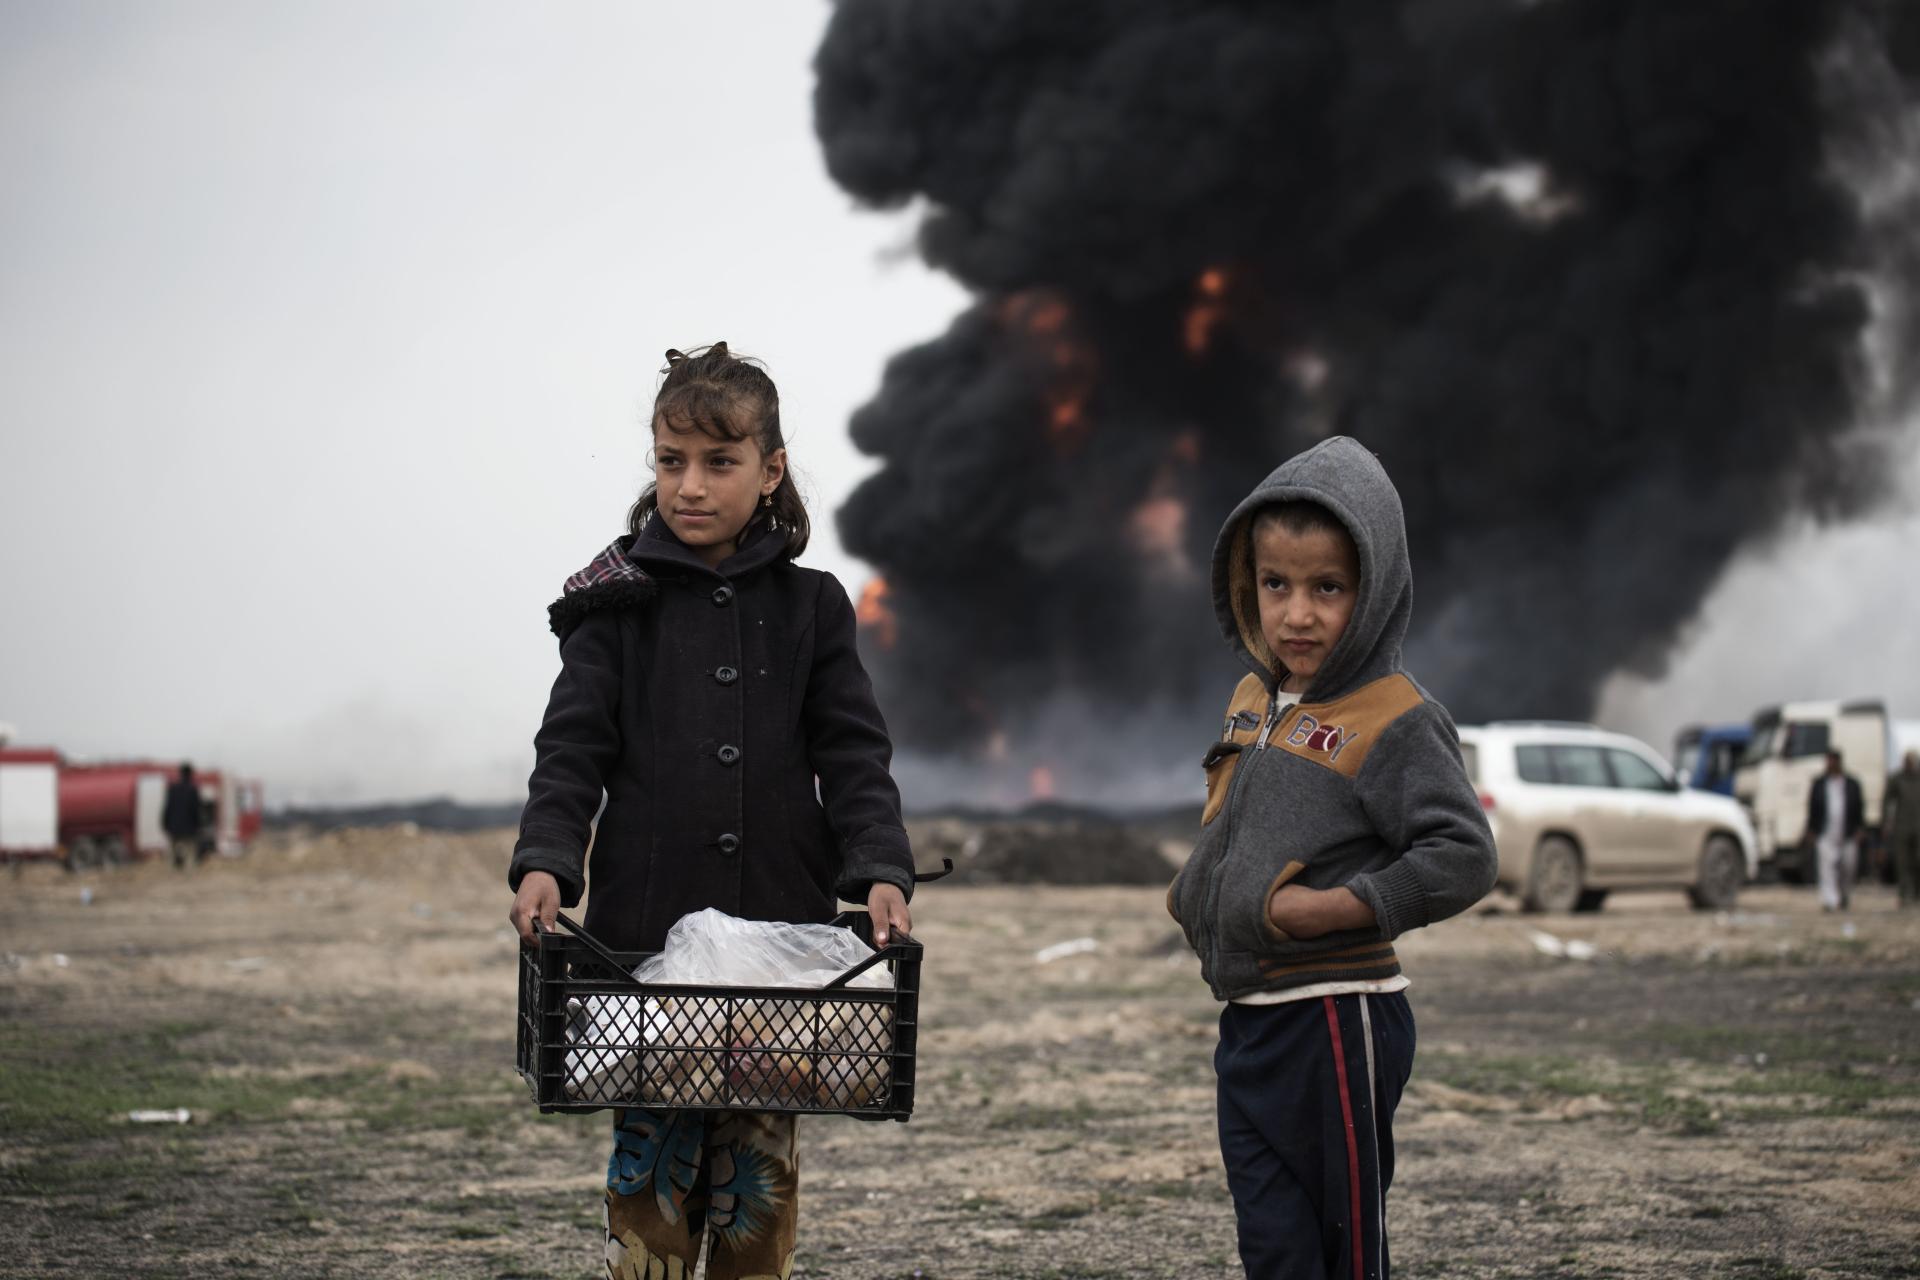 a girl and a boy look out with dismay as a fire burns behind them in a scence of war